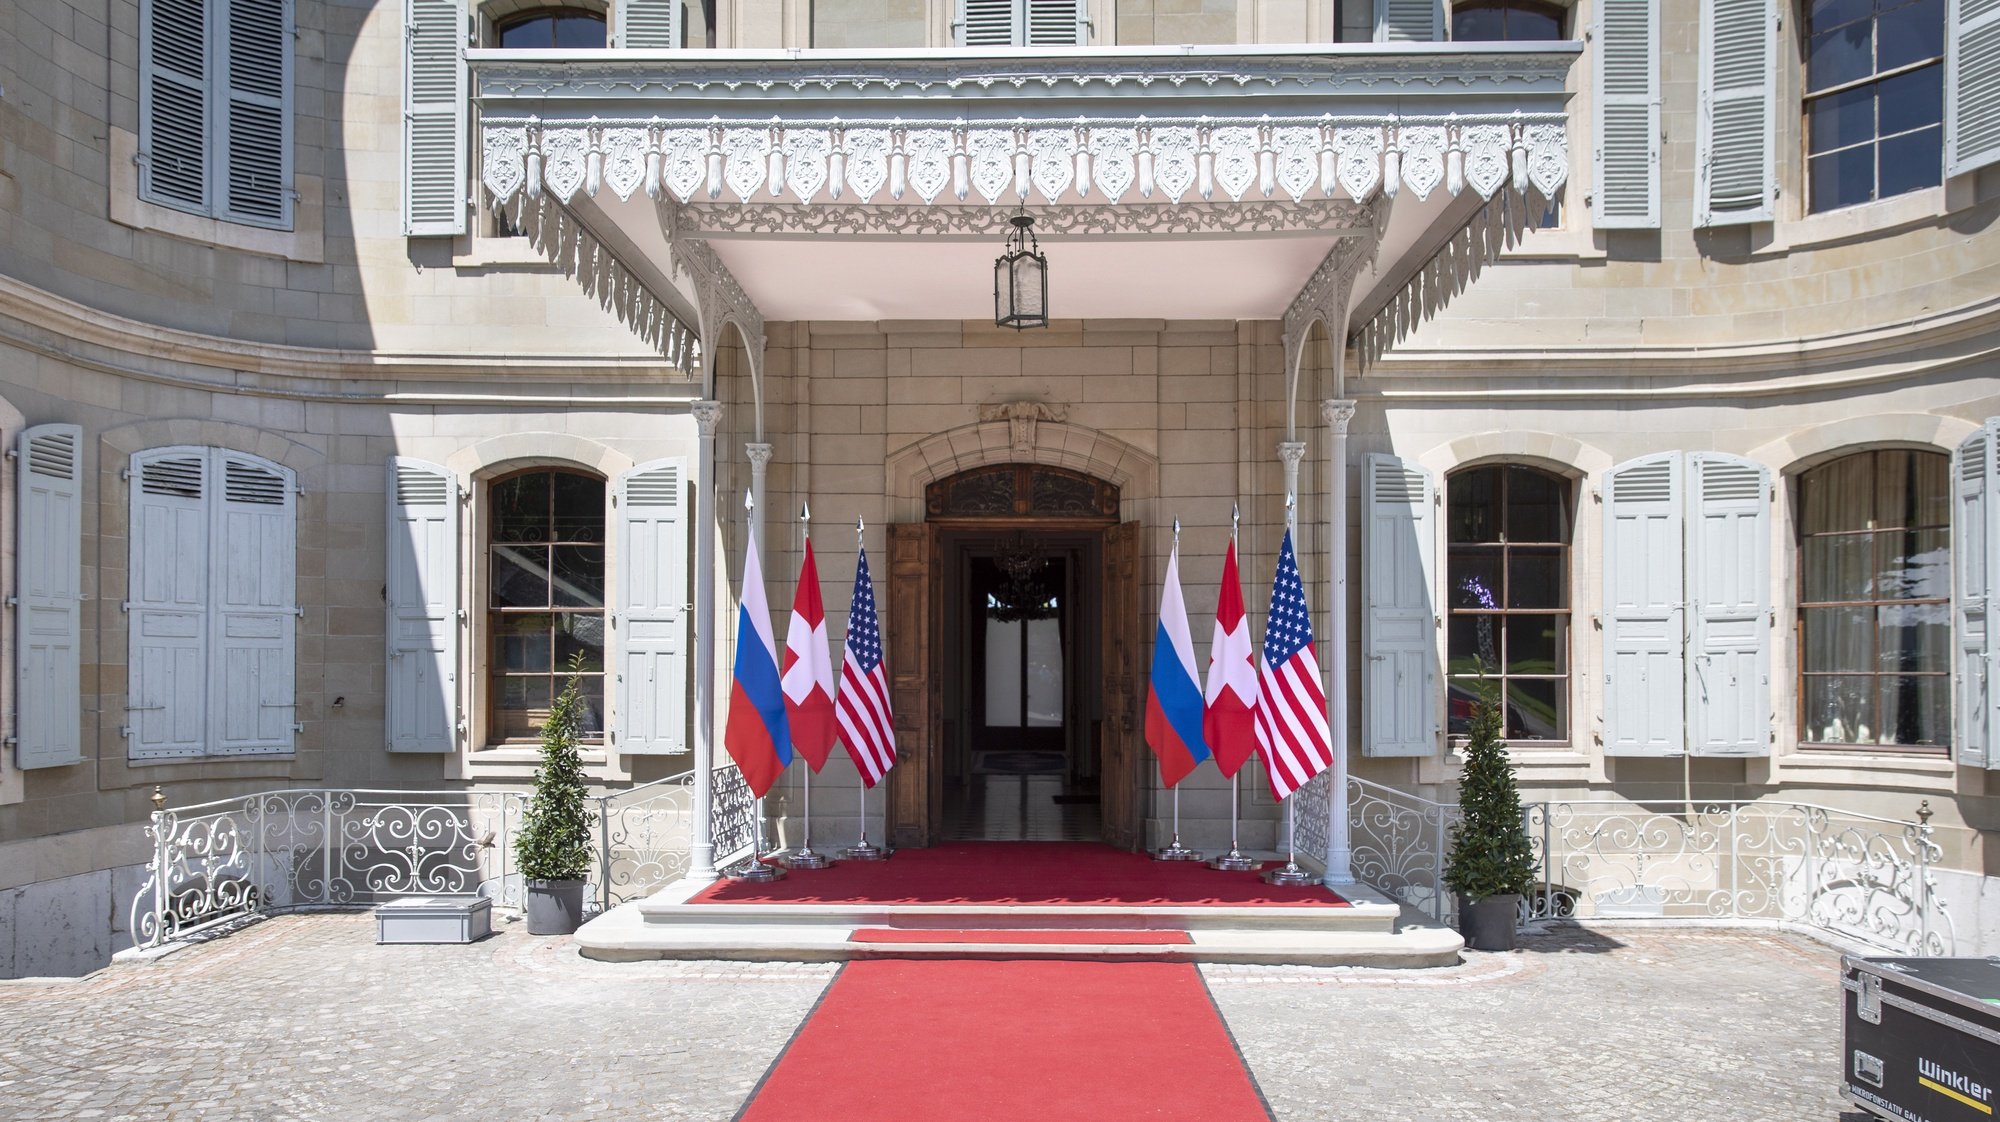 epa09273033 Flags of the US, Russia and Switzerland photographed in front of the entrance of the villa La Grange, one day prior to the US - Russia summit in Geneva, Switzerland, 15 June 2021. The meeting between US President Joe Biden and Russian President Vladimir Putin is scheduled in Geneva for 16 June 2021.  EPA/PETER KLAUNZER